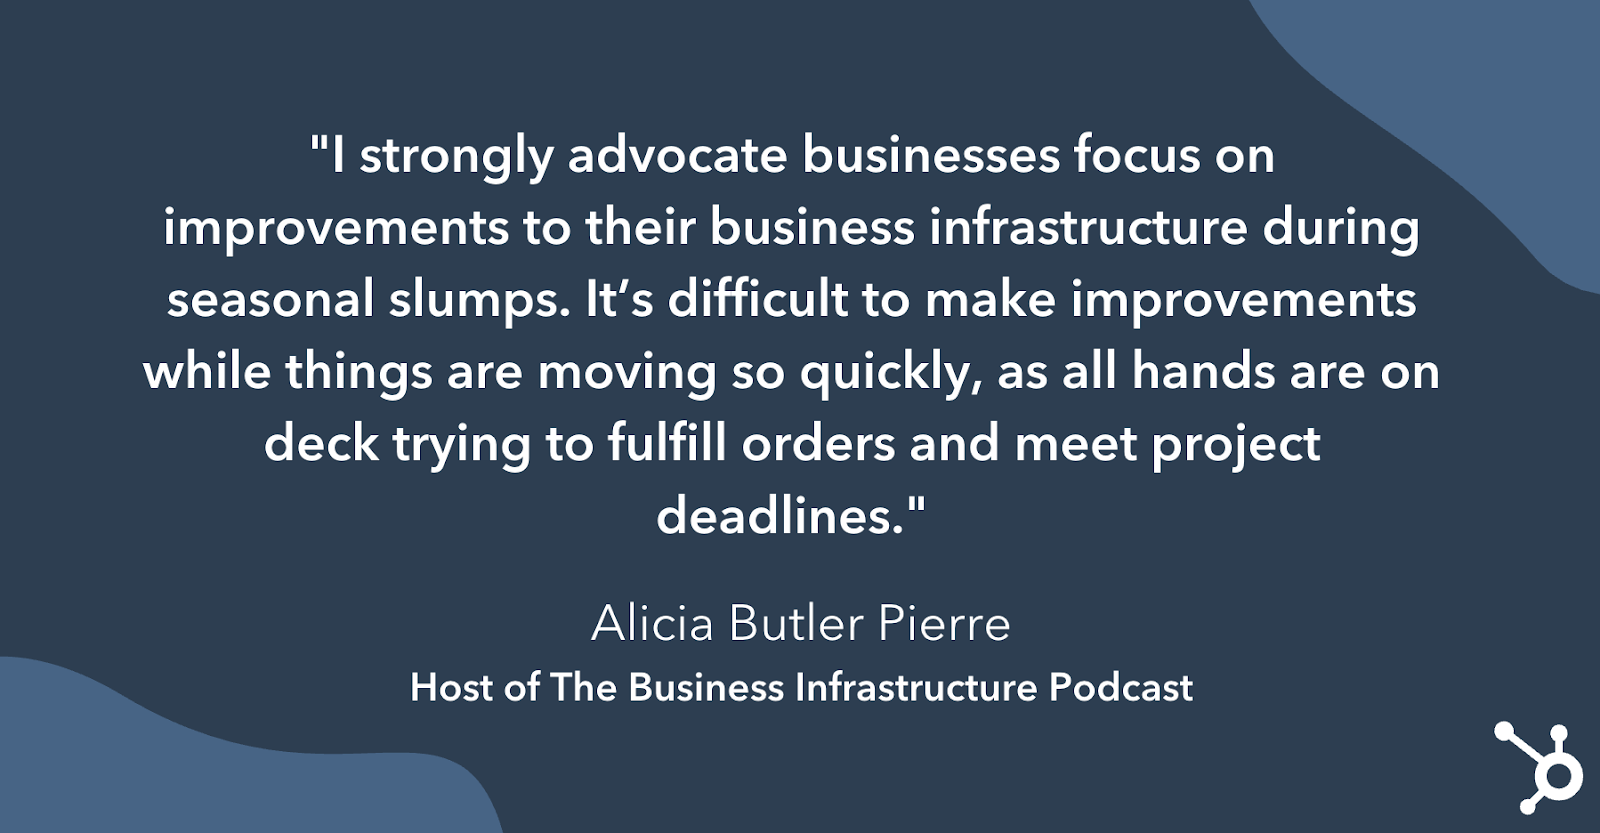 Quote from Alicia Butler Pierre on why businesses should use slow times to plan for busier times when its harder to make improvements